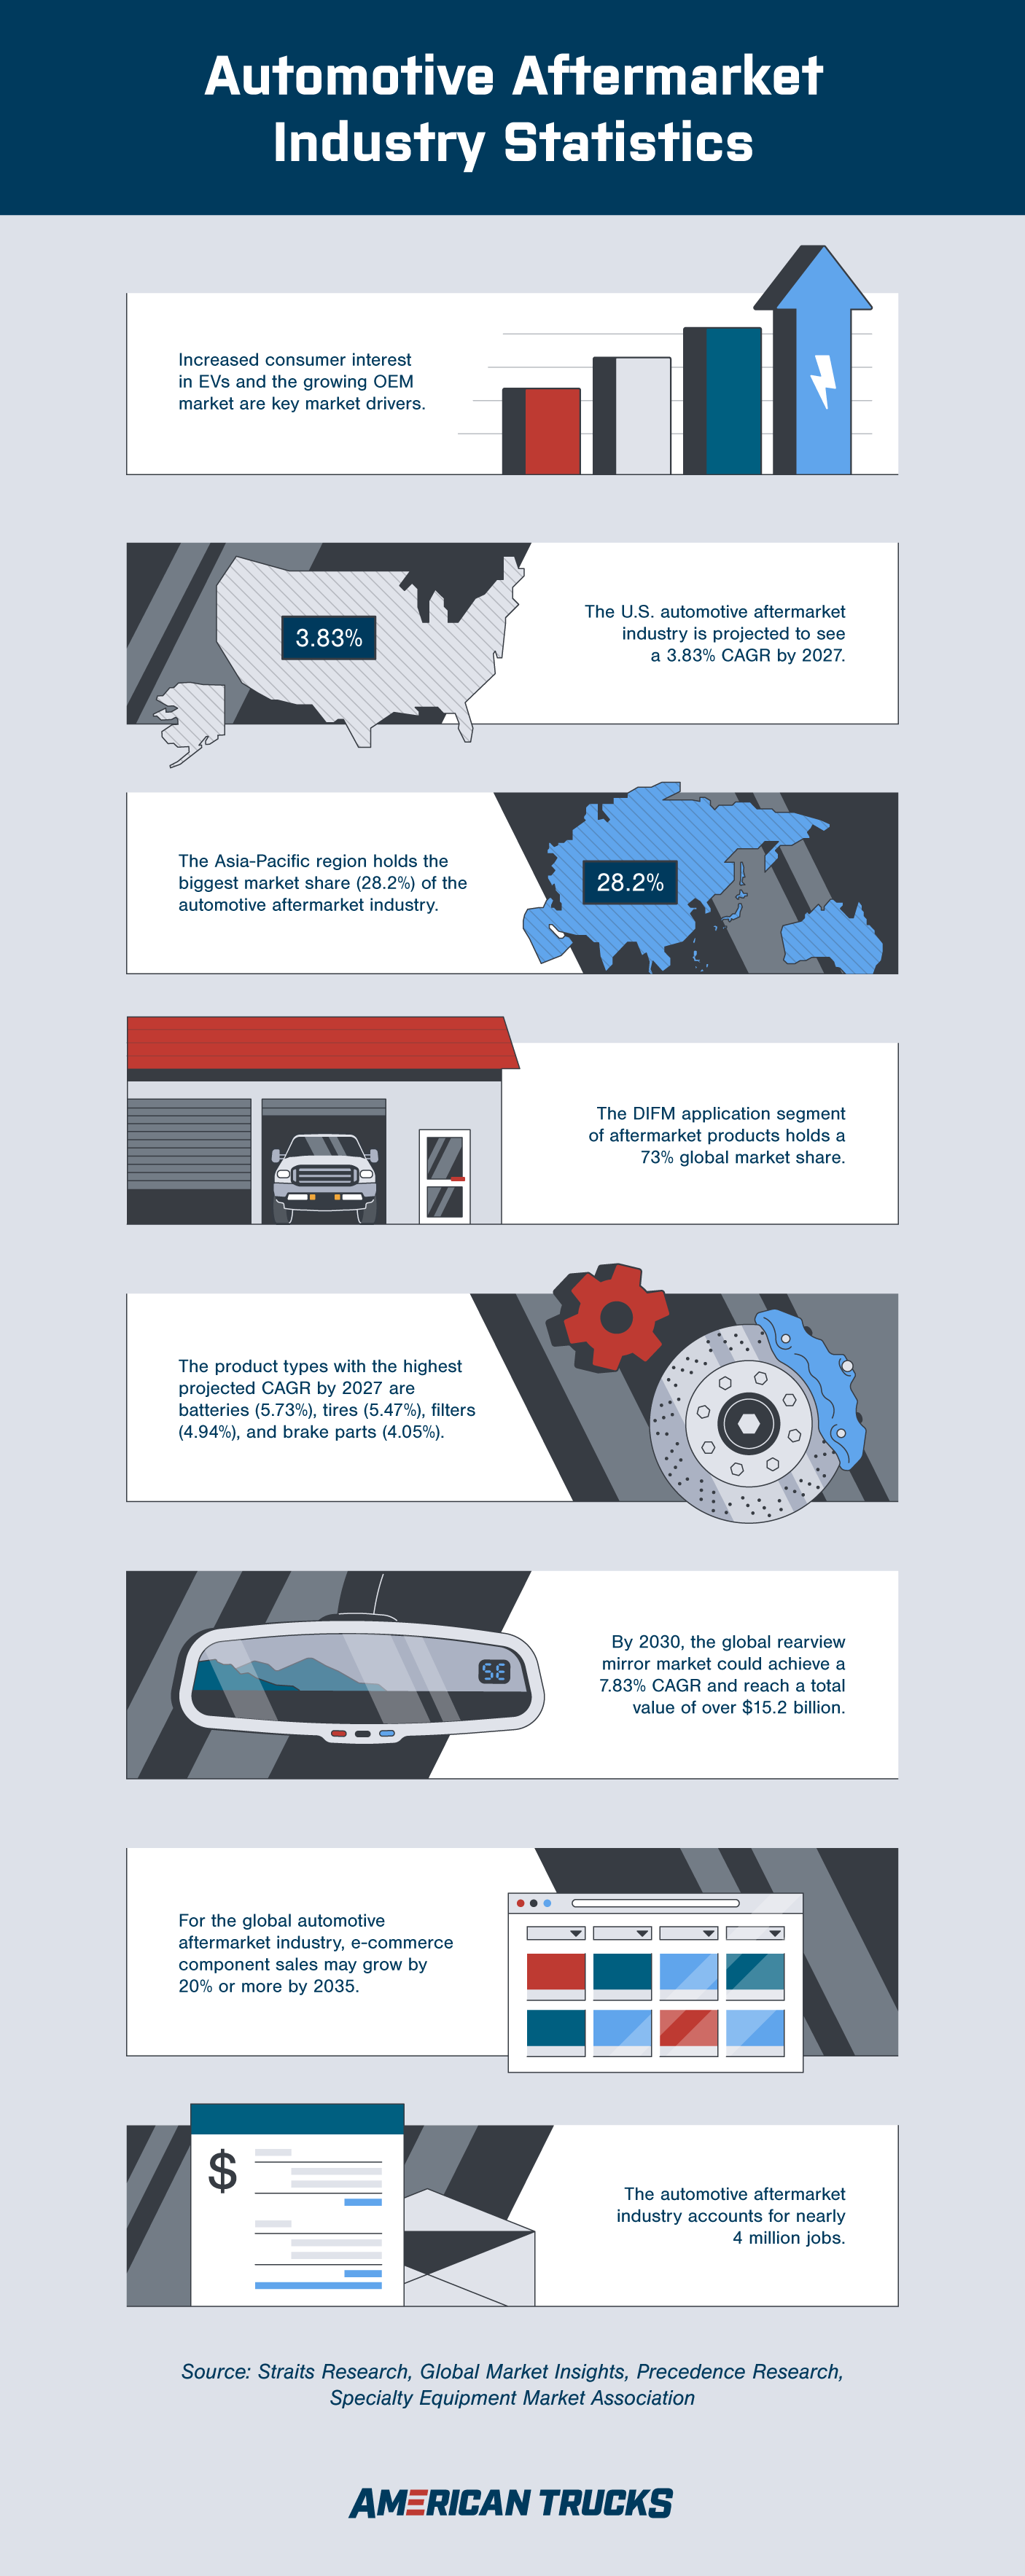 Infographic showing various automotive aftermarket industry statistics.